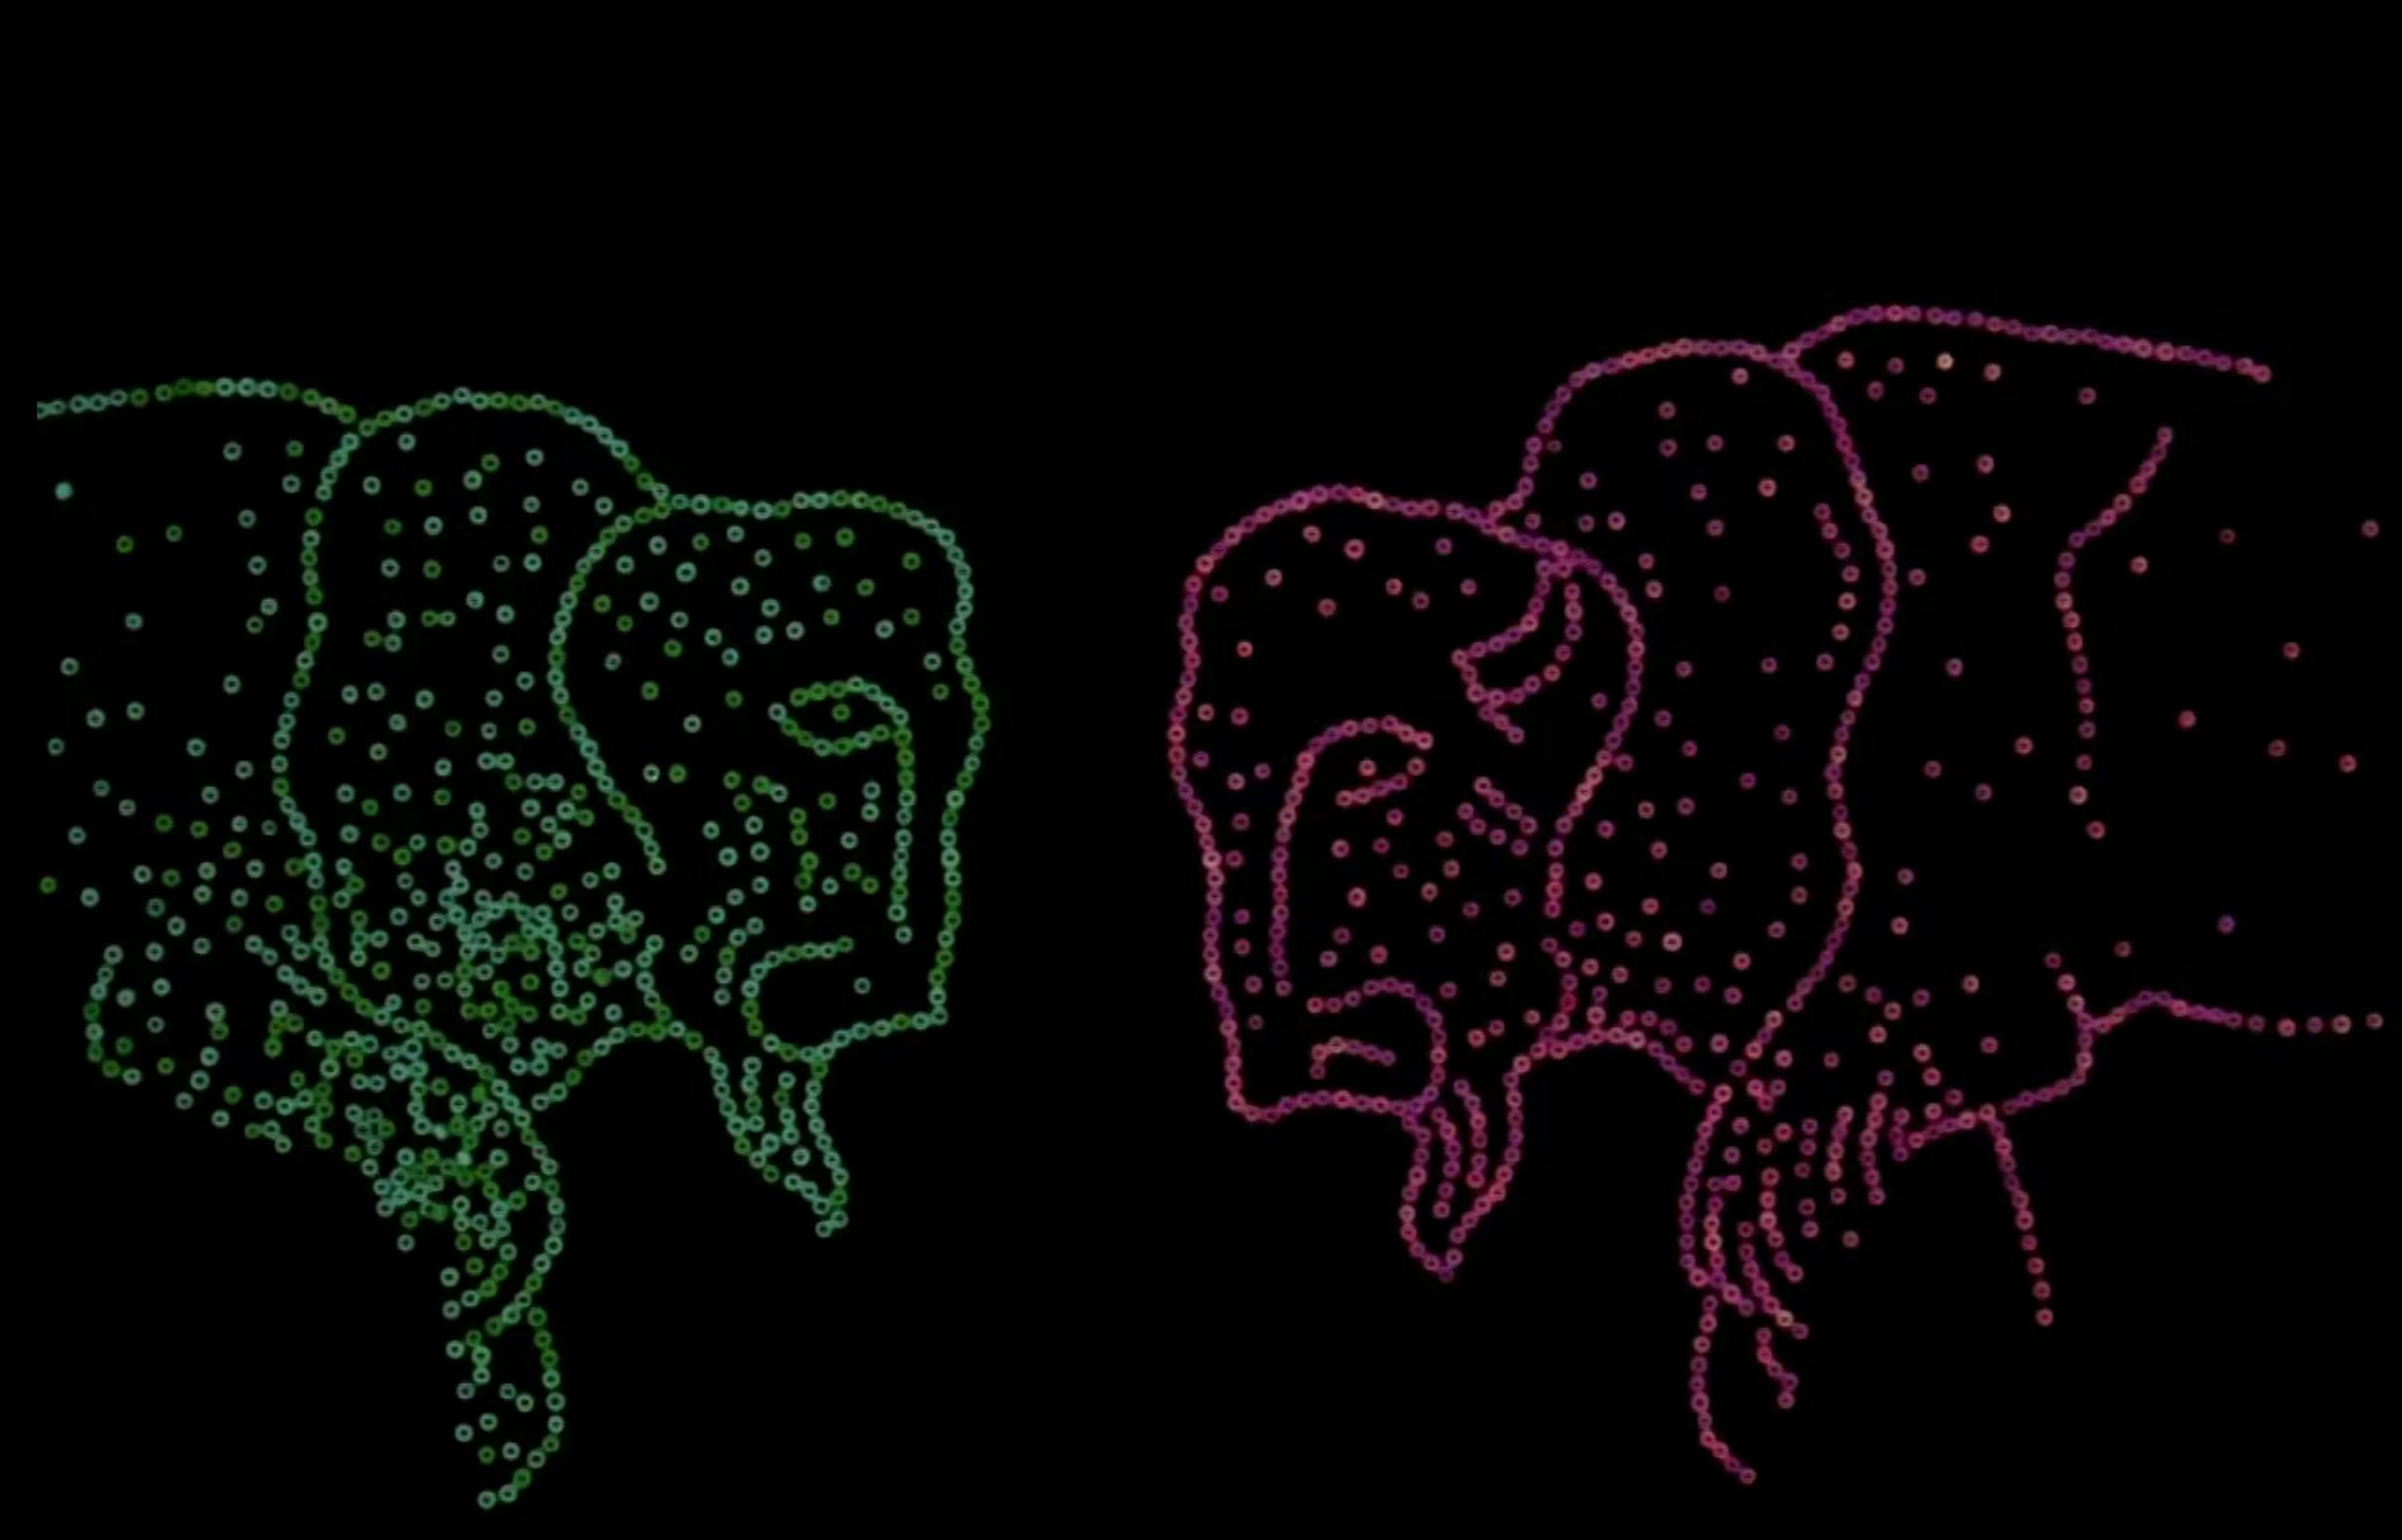 black background, illustrations of buffalo are made out of green sequins on the left and pink sequins on the right